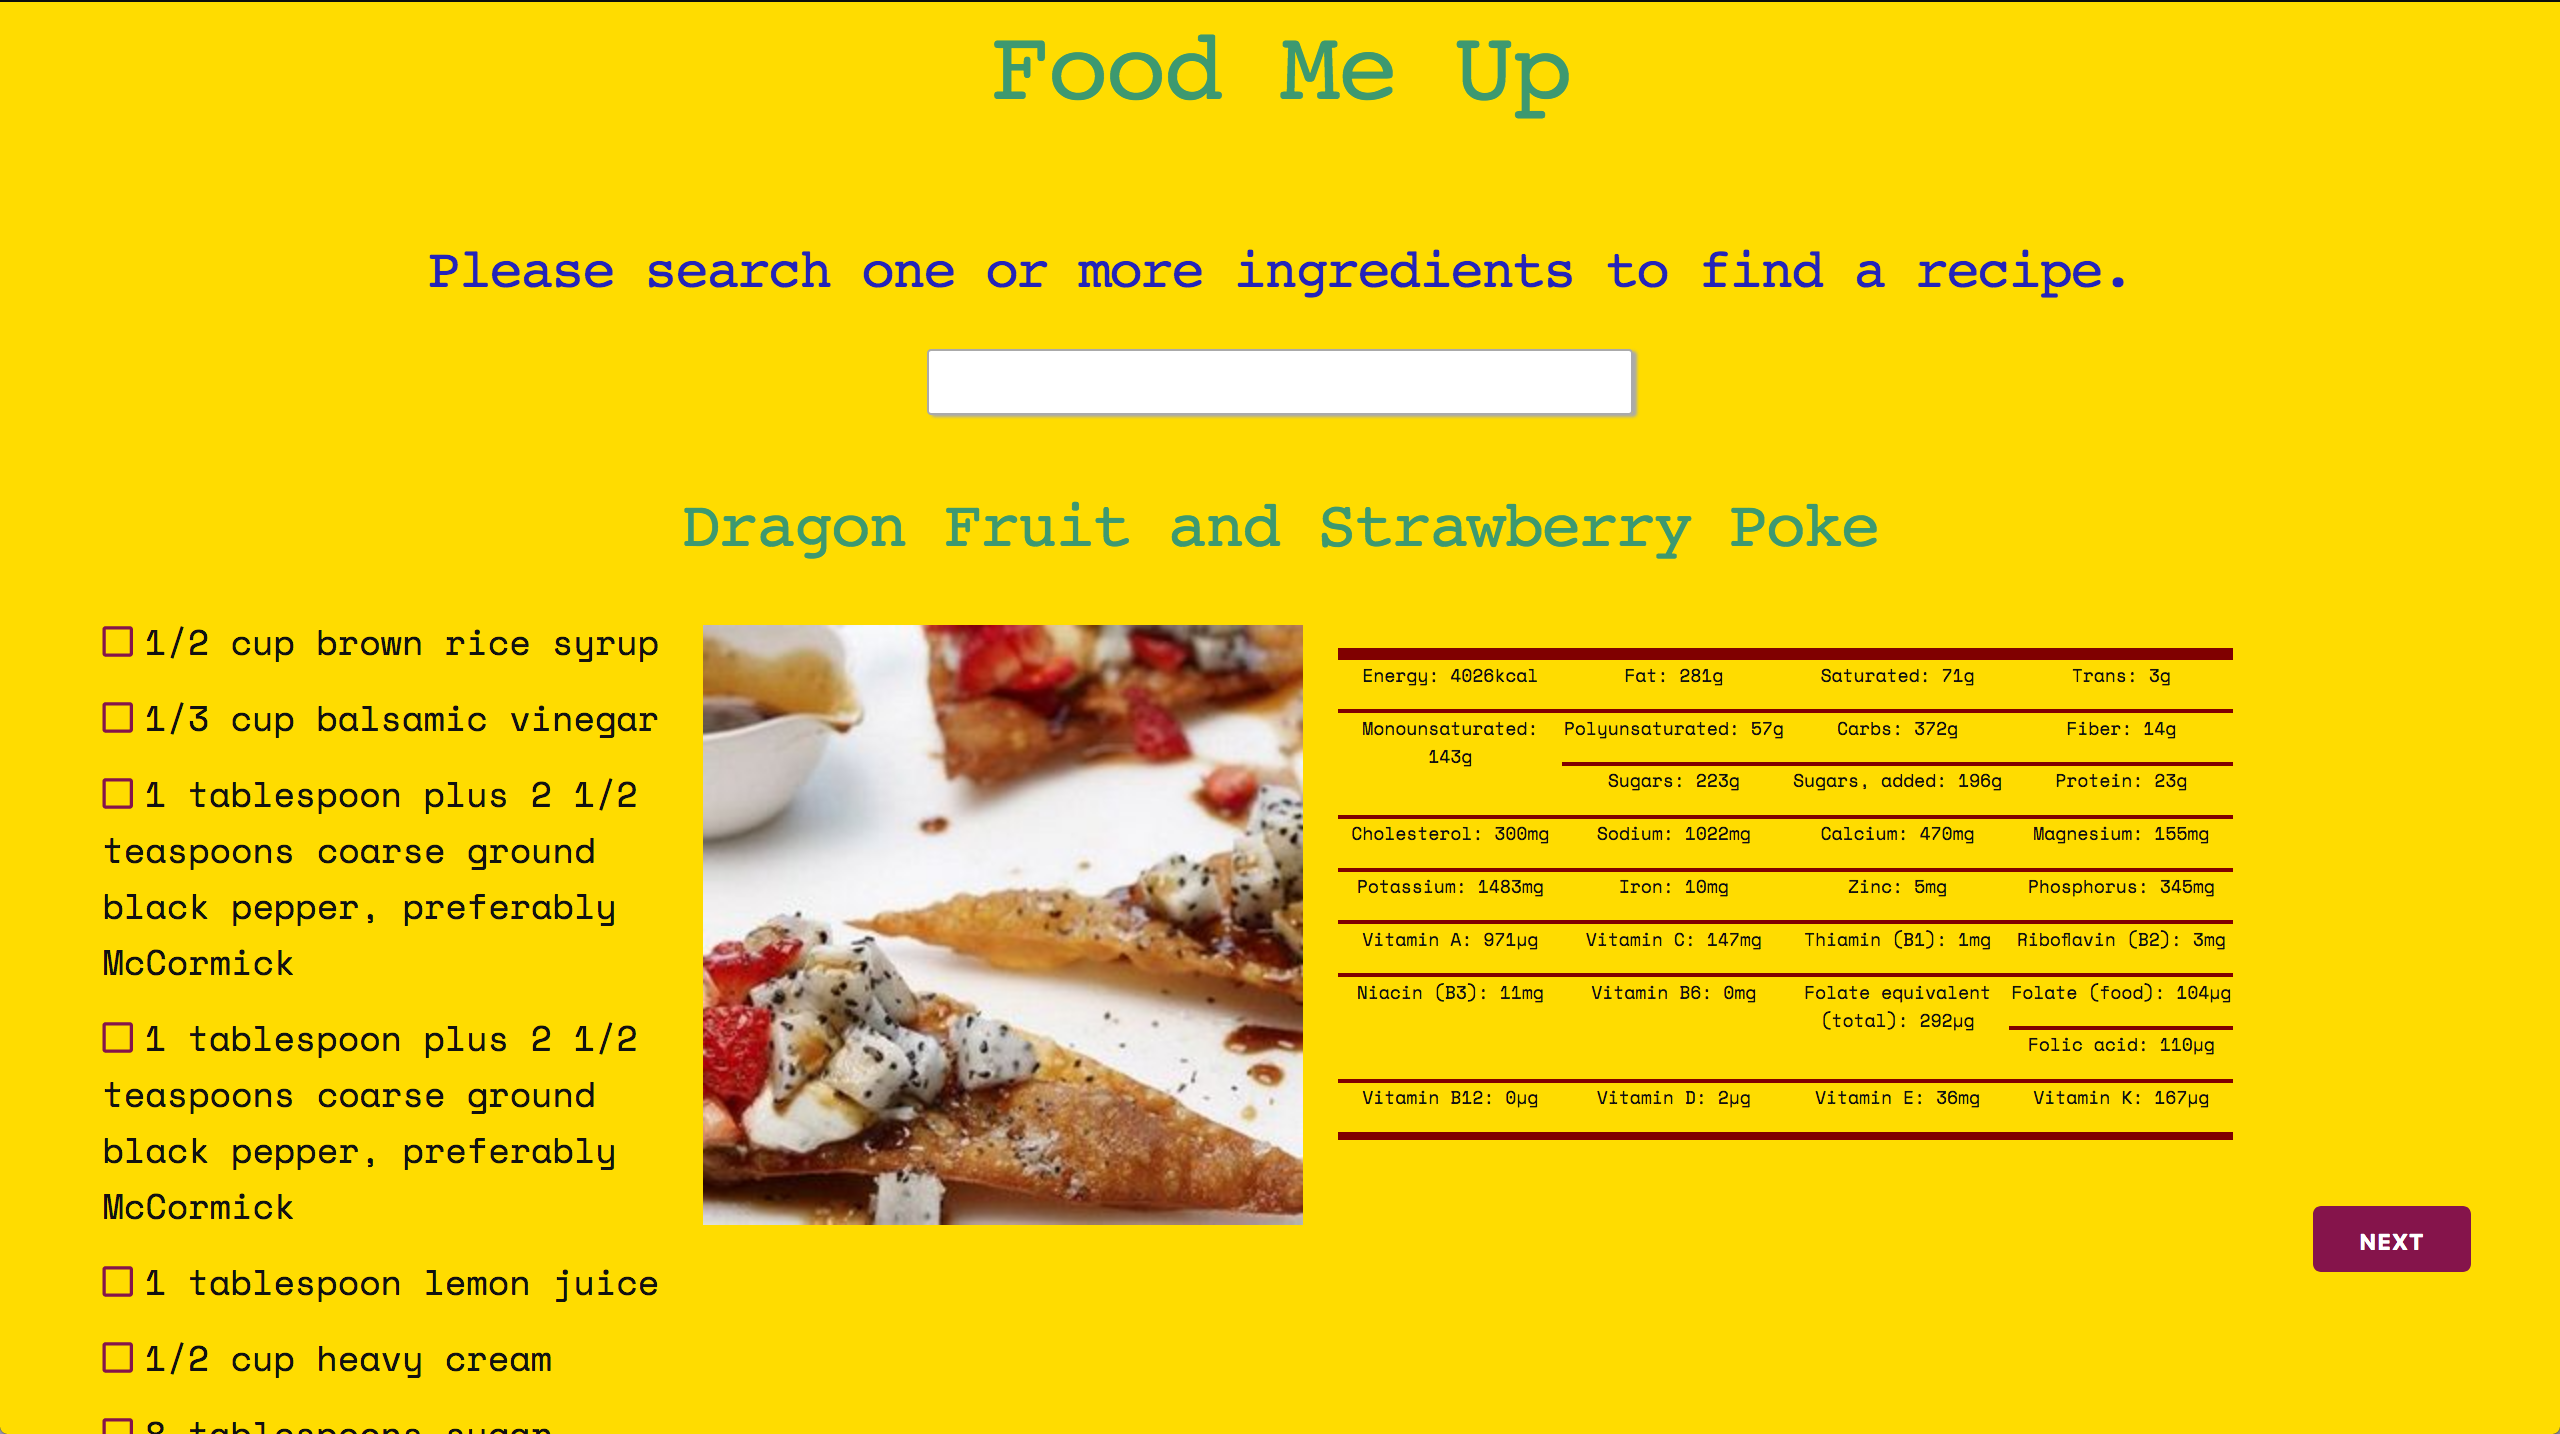 Dragon fruit and strawberry poke ingredients list and nutritional facts